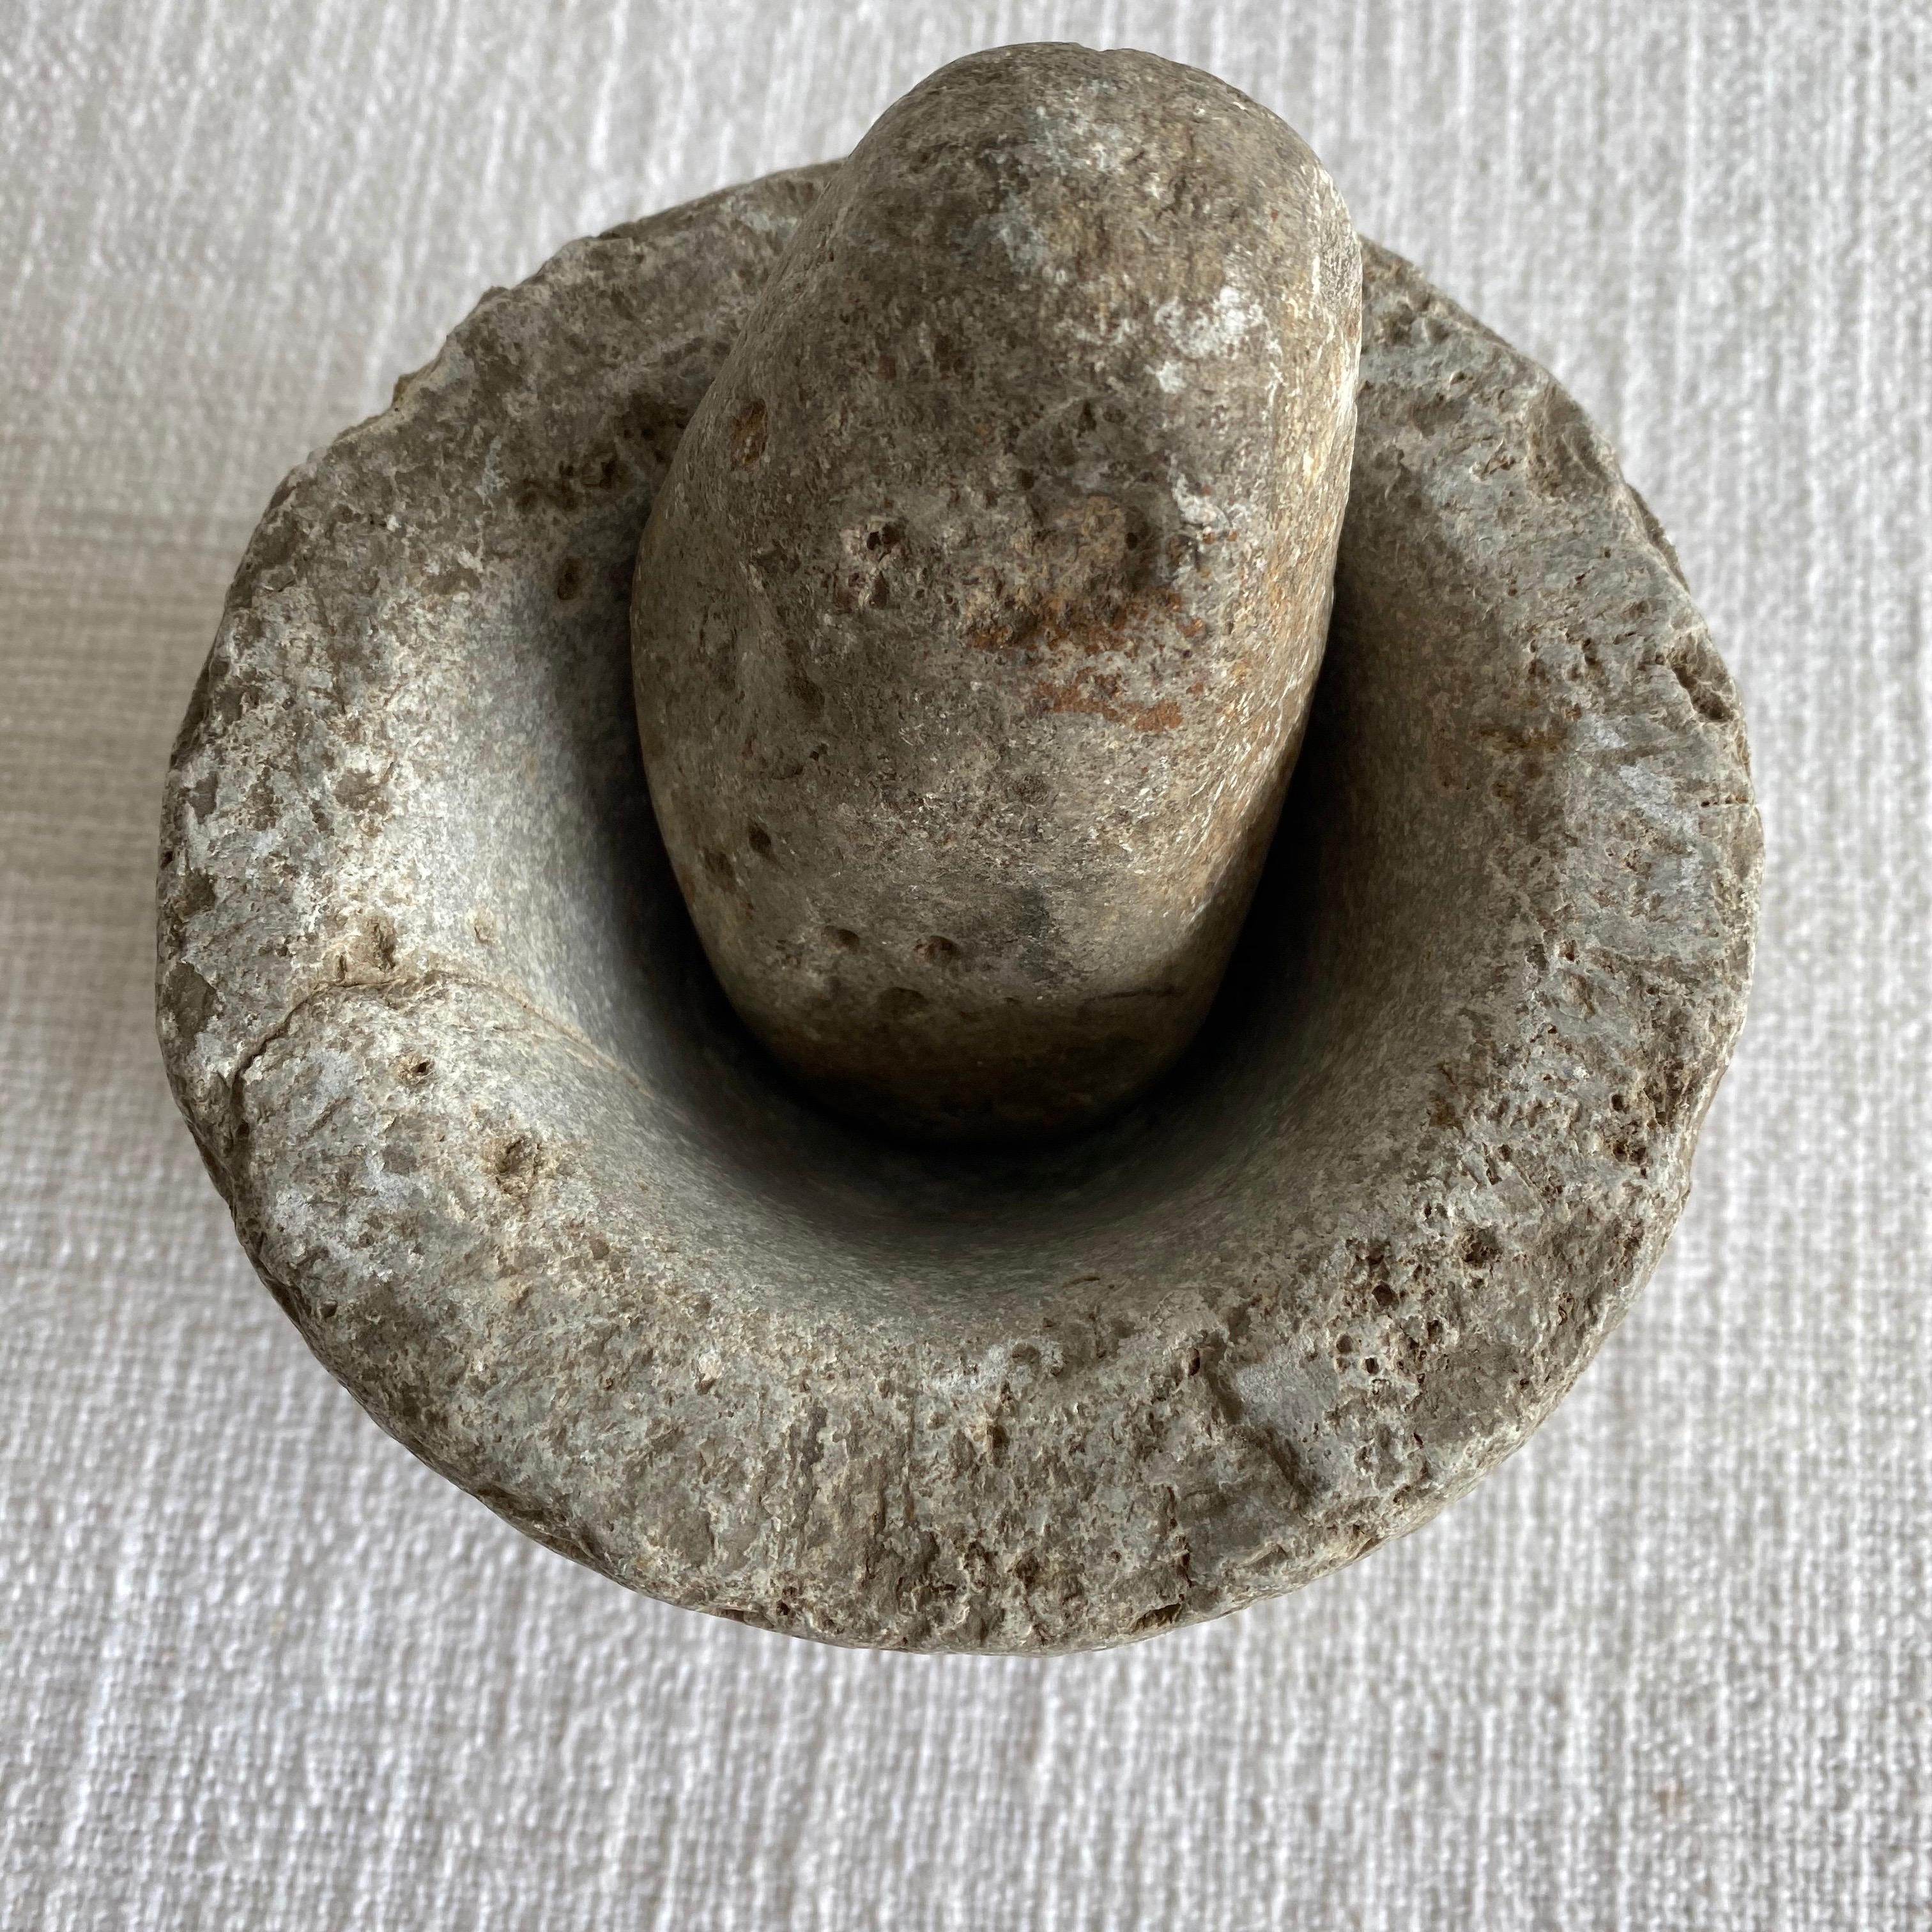 Antique stone mortar and pestle set, solid heavy stone, use as decoration, or for everyday use.
Size: 5.5” D x 4.5”
Weight: 10lbs.